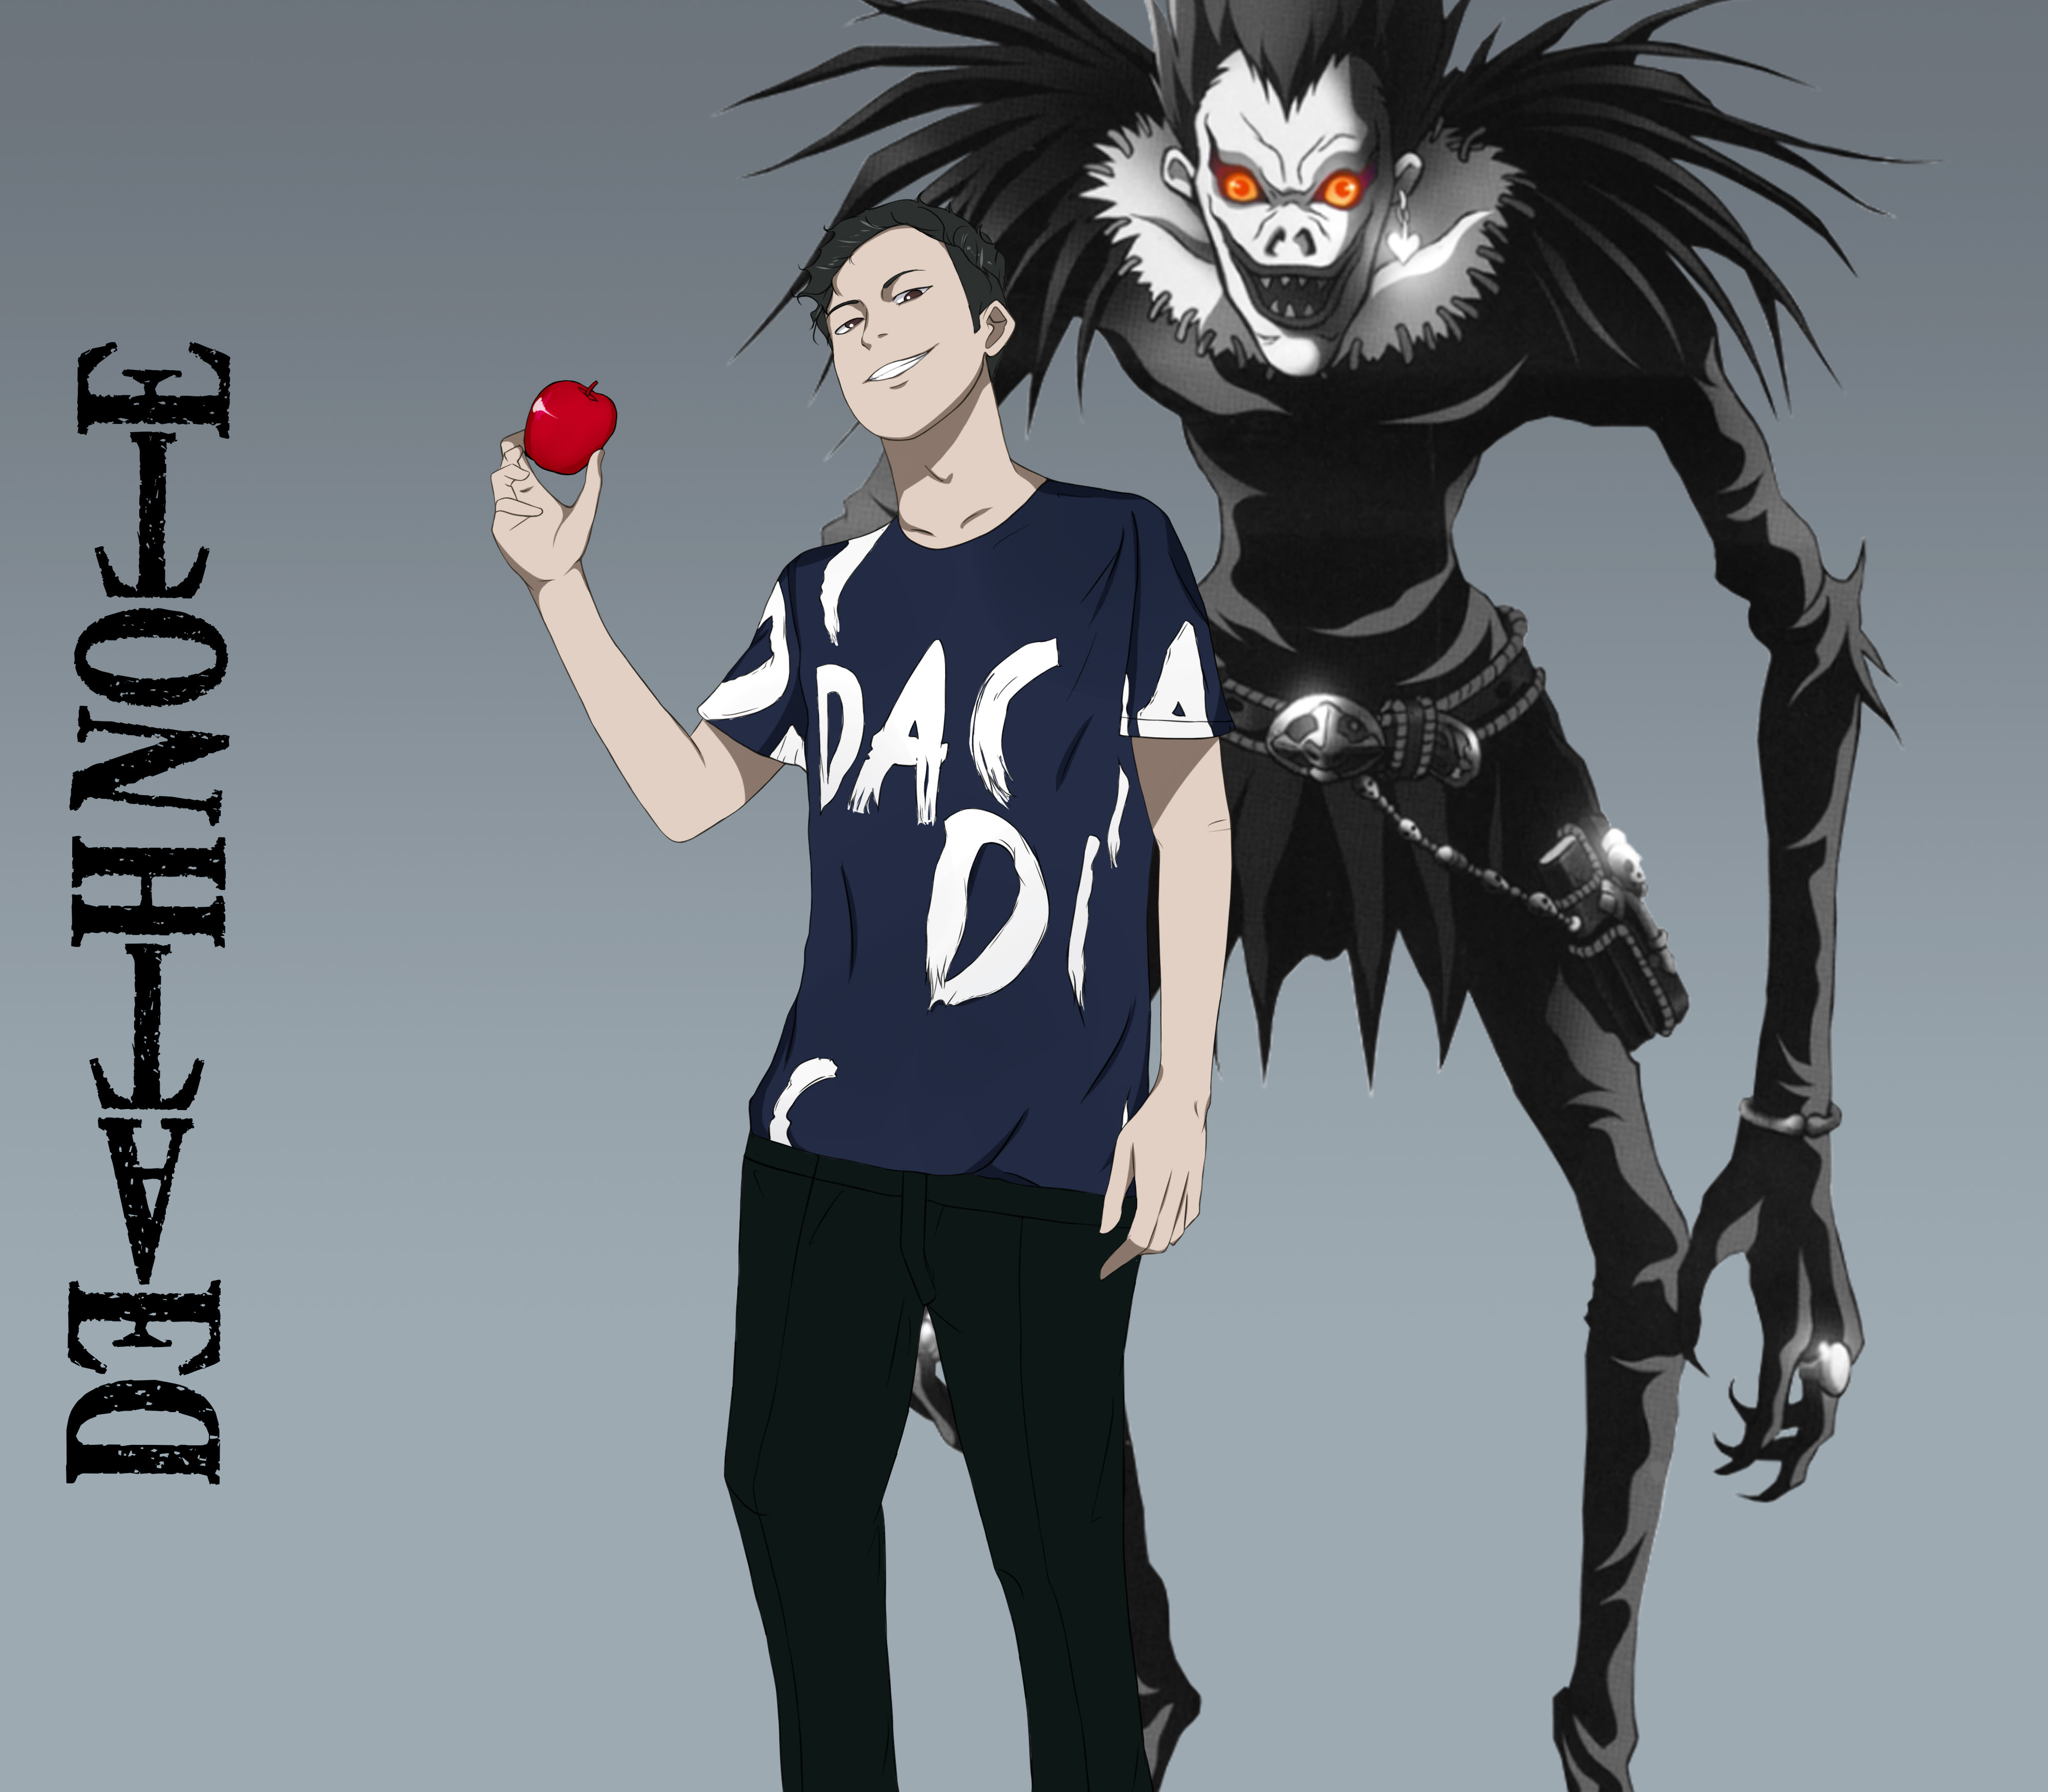 Draw you in death note anime style by Sennsennart_